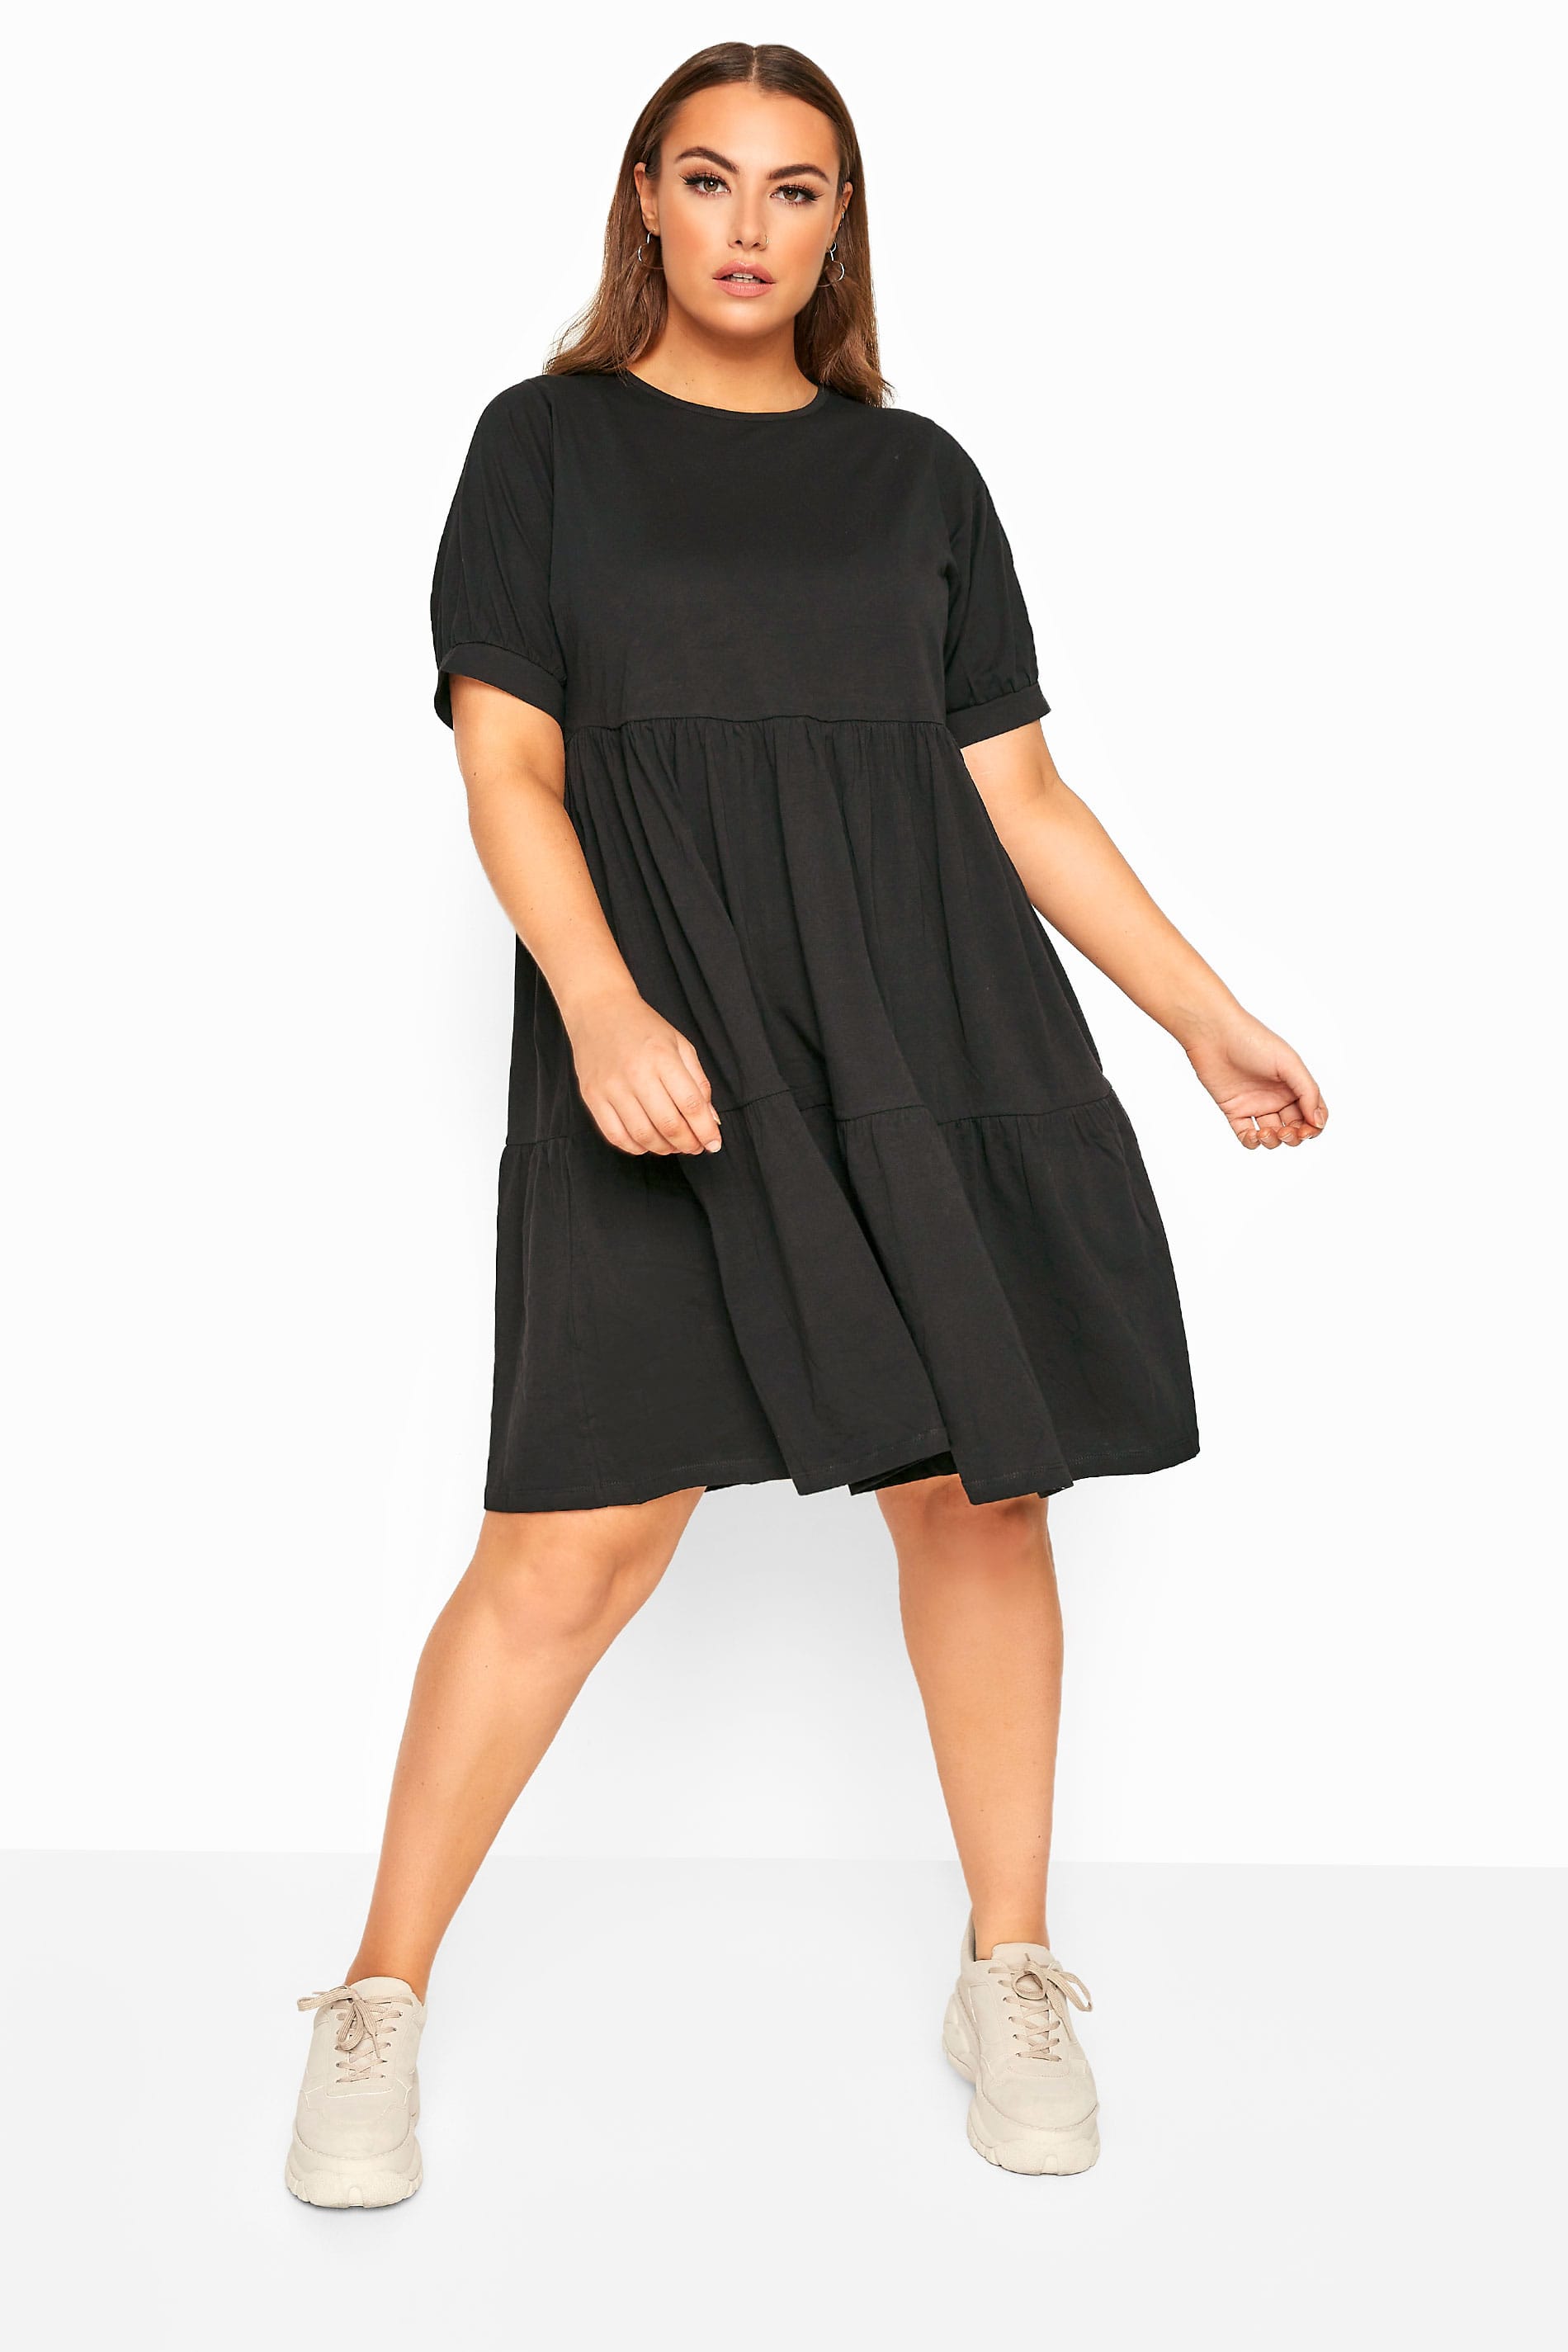 LIMITED COLLECTION Black Tiered Cotton Smock Dress 1